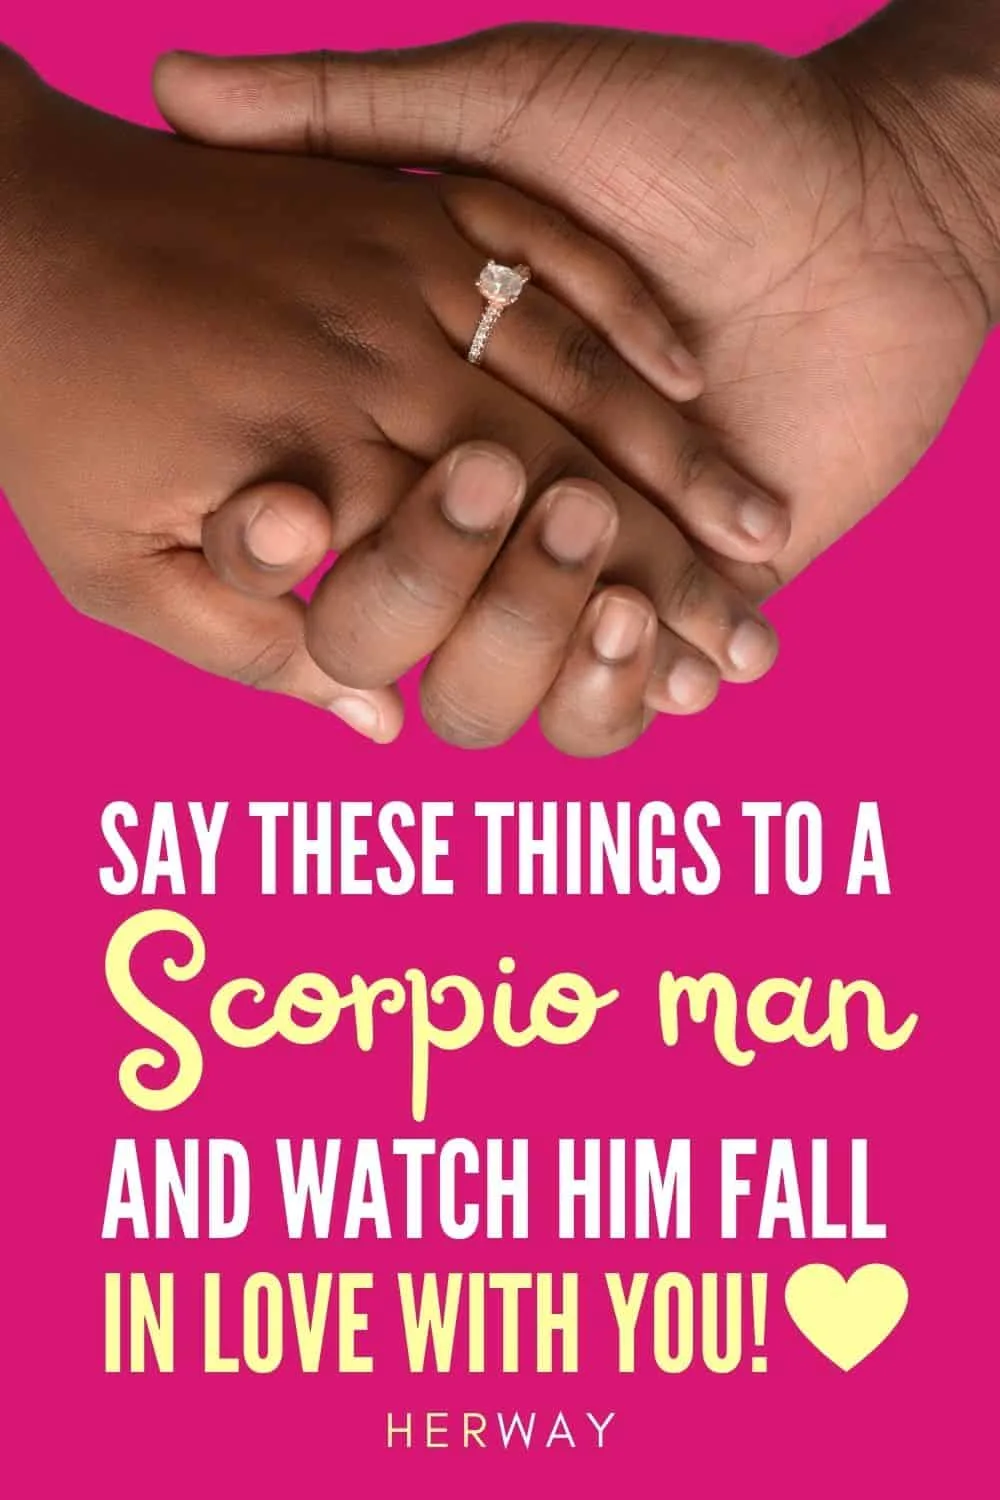 What A Scorpio Man Wants To Hear 15 Lines To Make Him Fall For You Pinterest